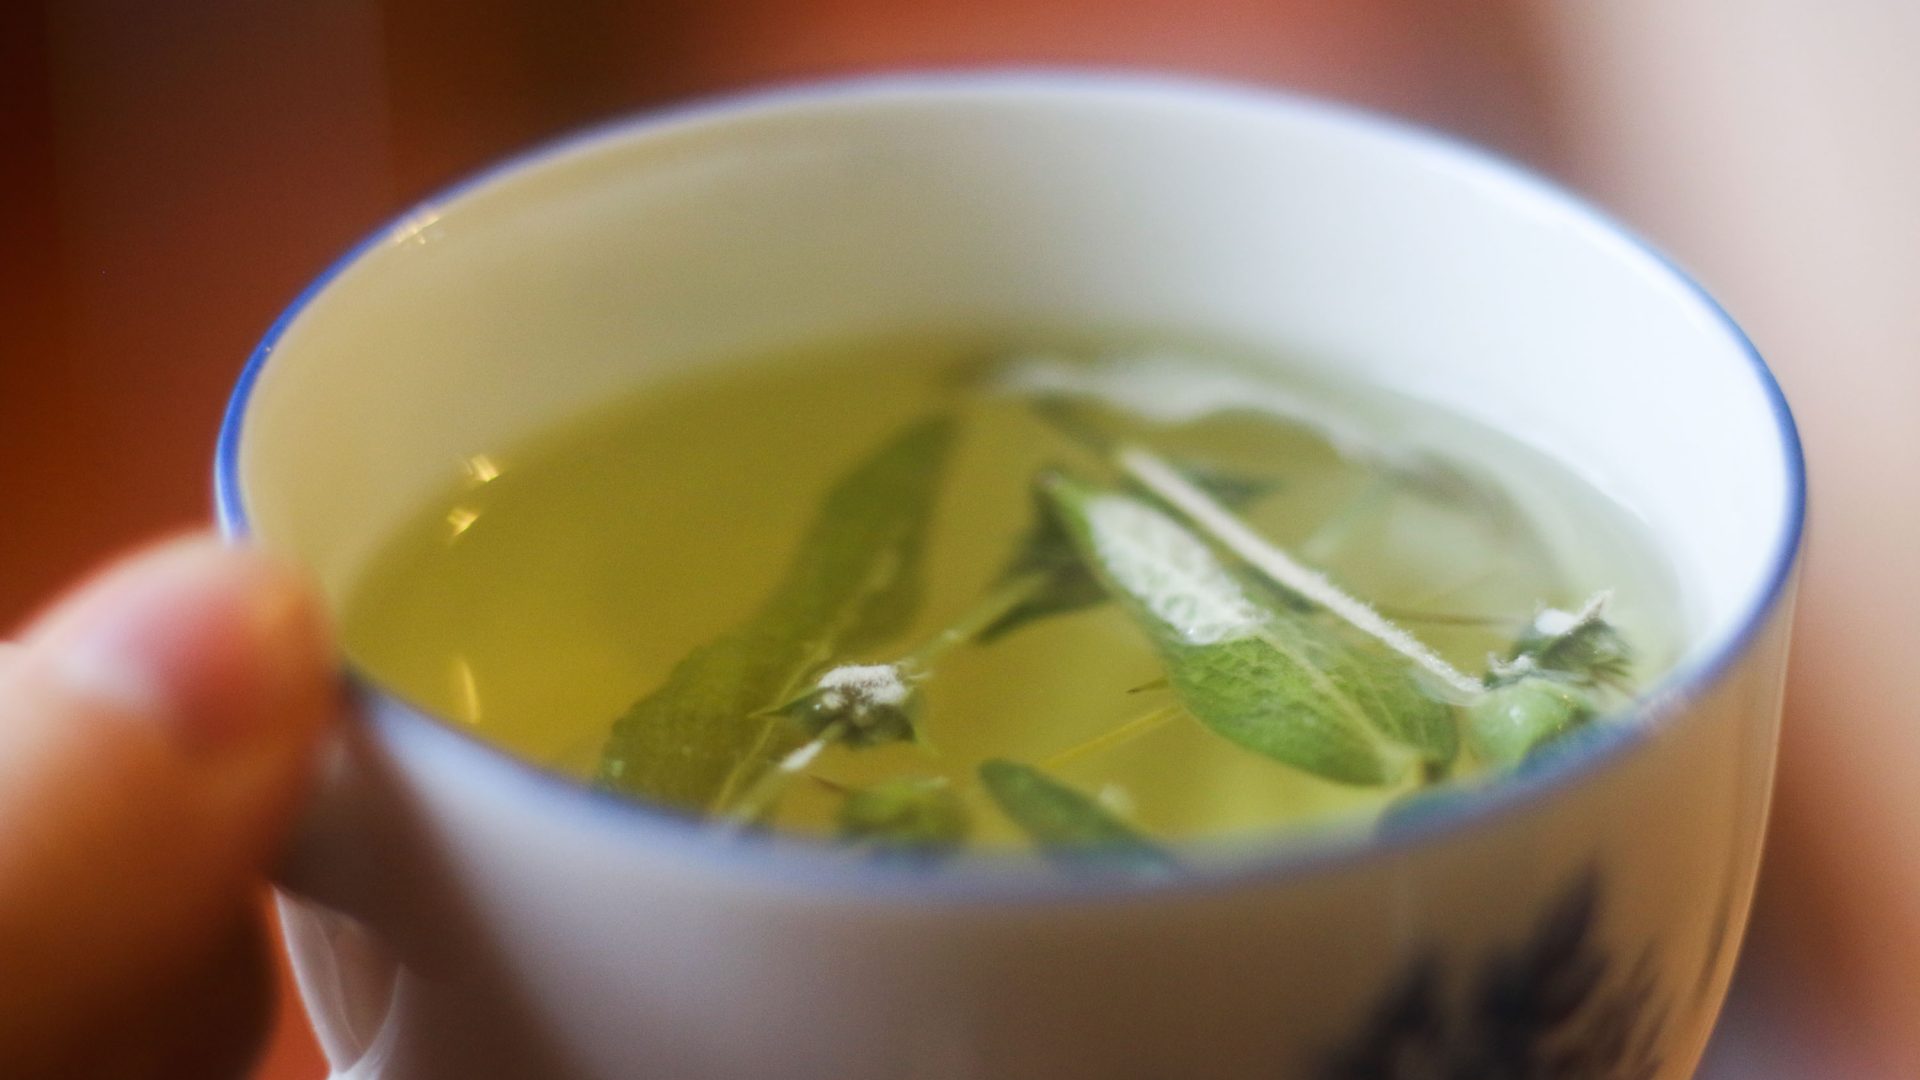 A cup of yellow looking tea with leaves in it.